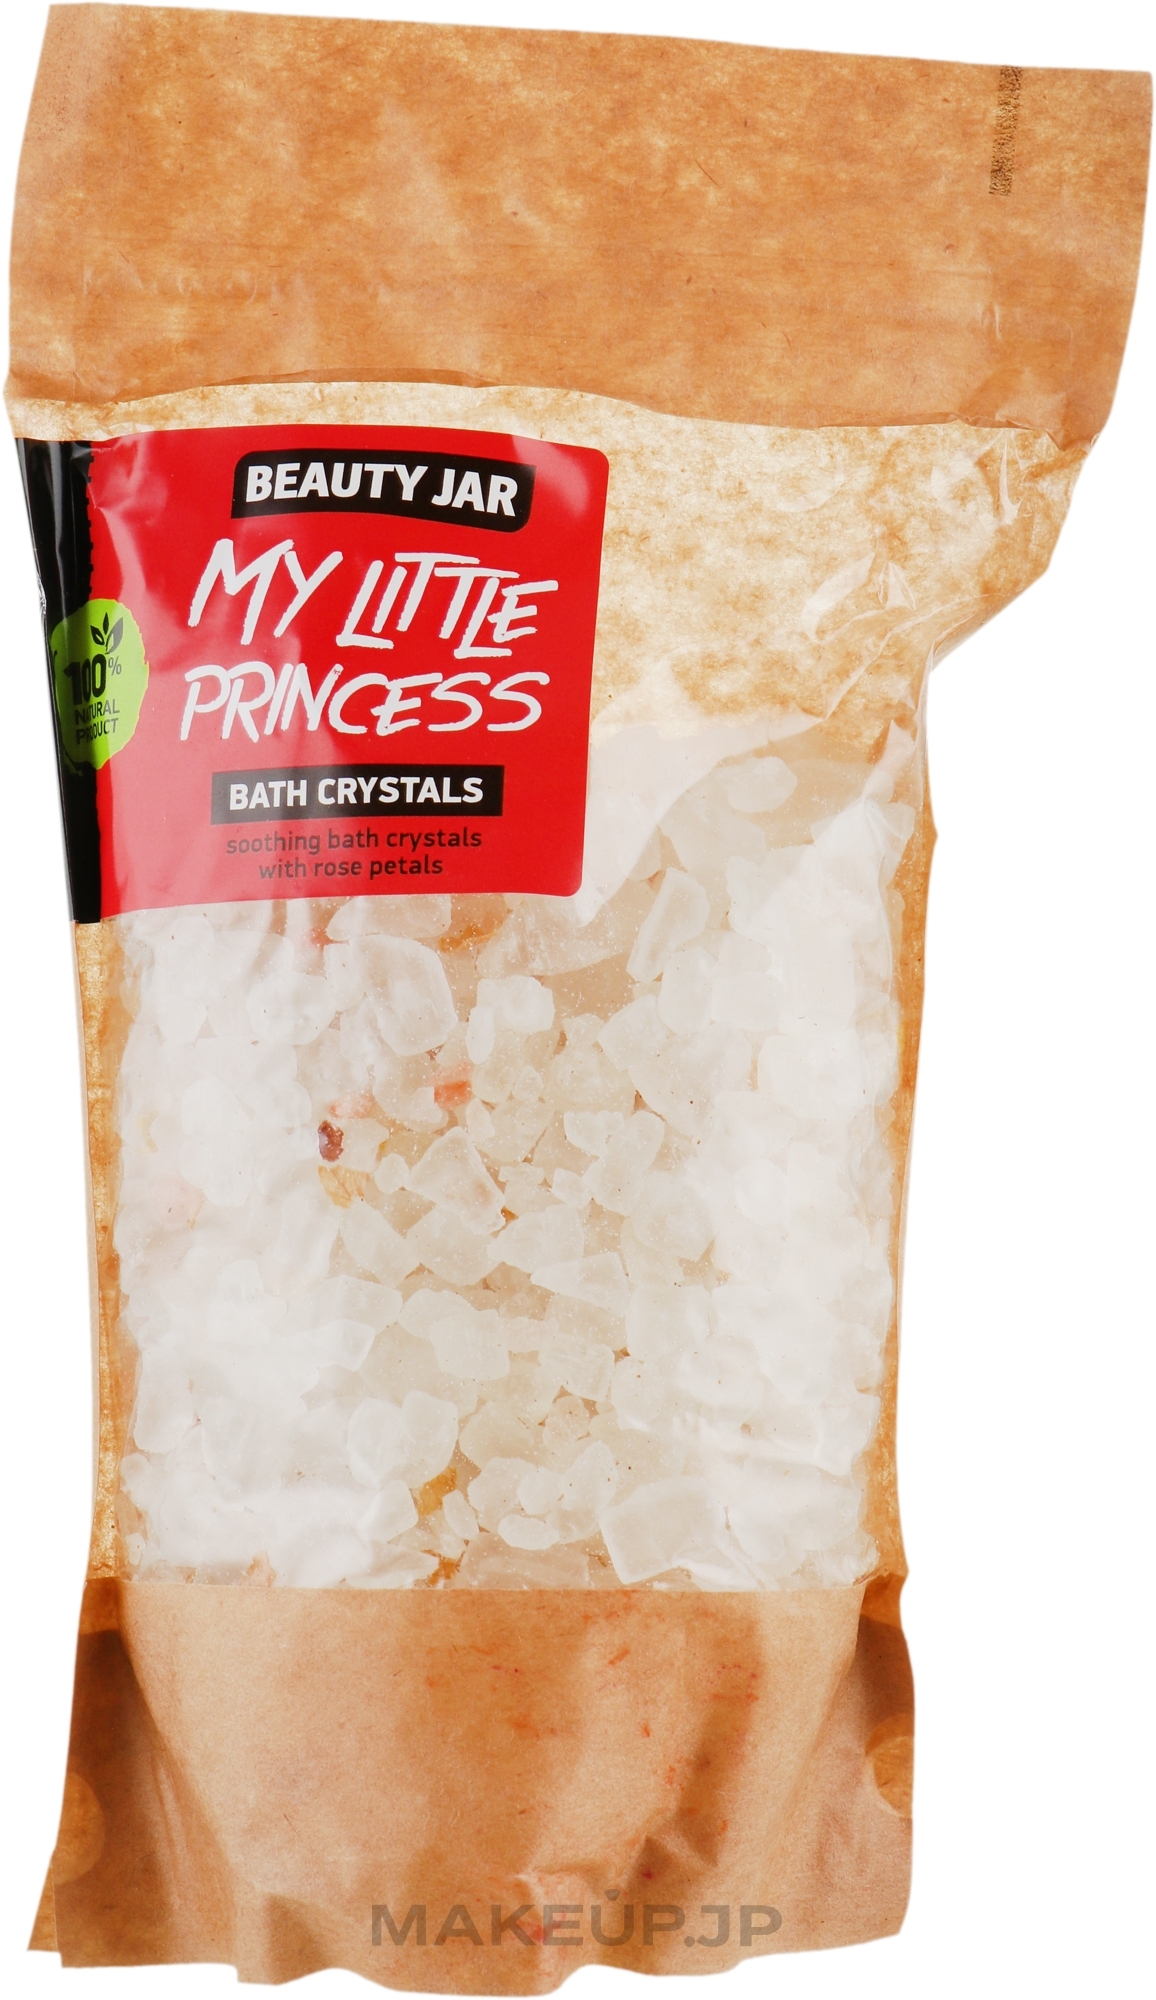 Soothing Bath Crystals with Rose Petals "My little princess" - Beauty Jar Bath Crystals — photo 600 g